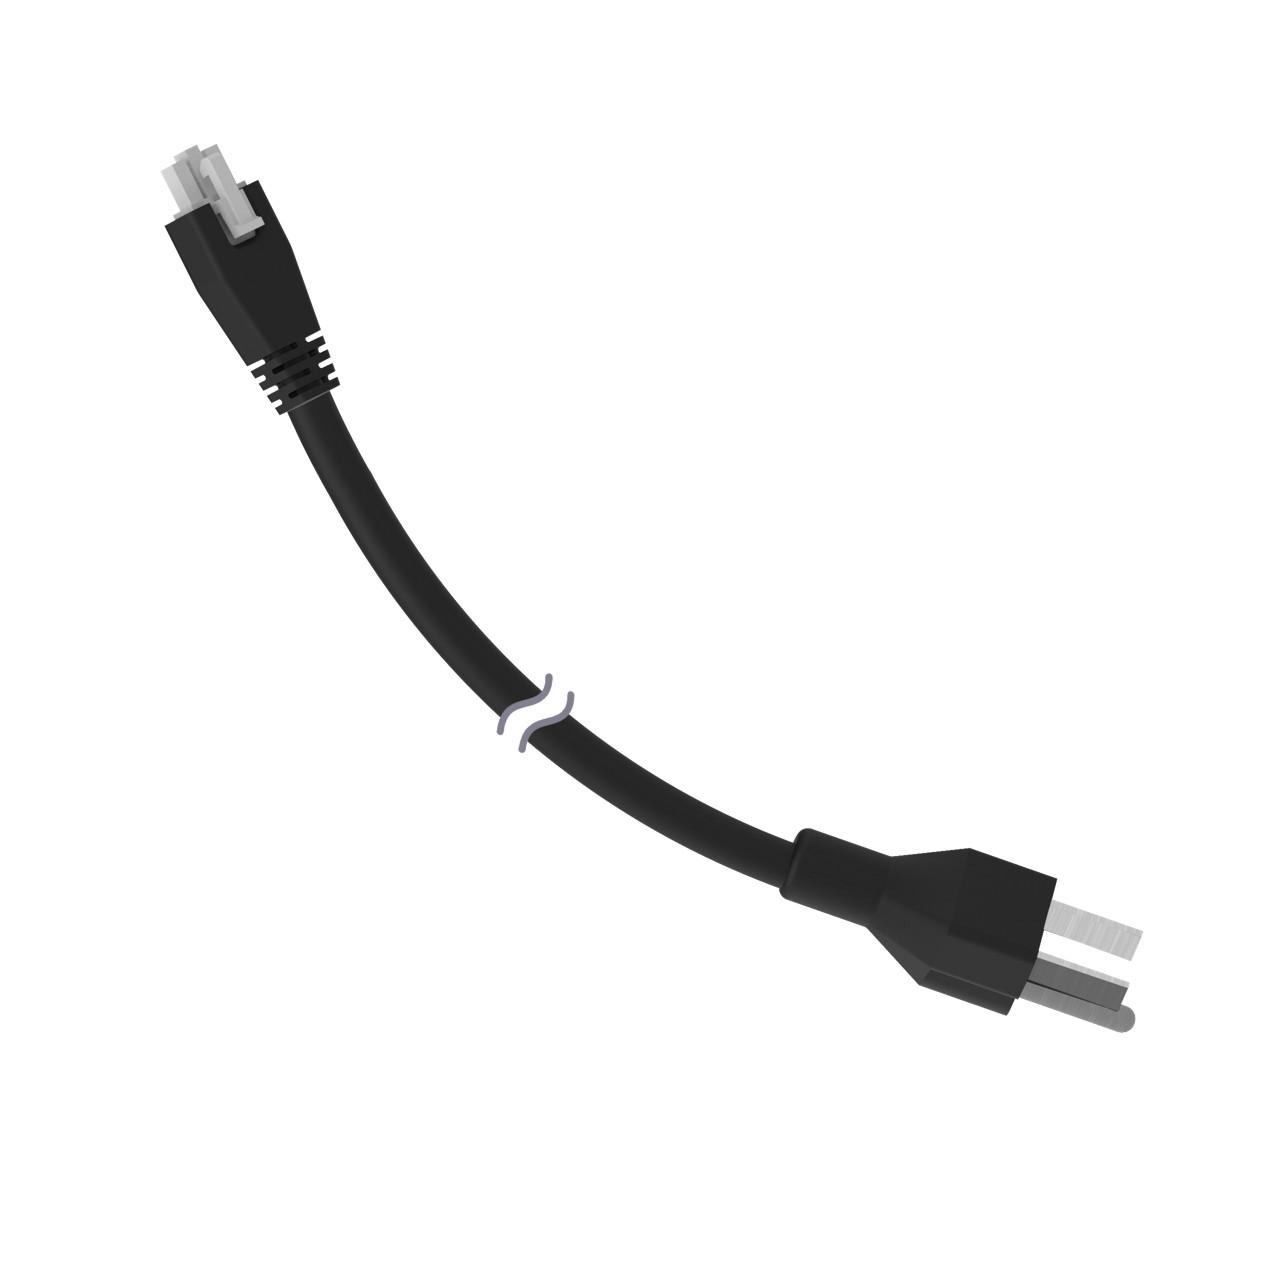 Banner LQMAC-310B Wall Plug Quick Disconnect Cable, Nema 5-15P Connector Straight, 3-pin Female Connector Straight, Length 3.0 m